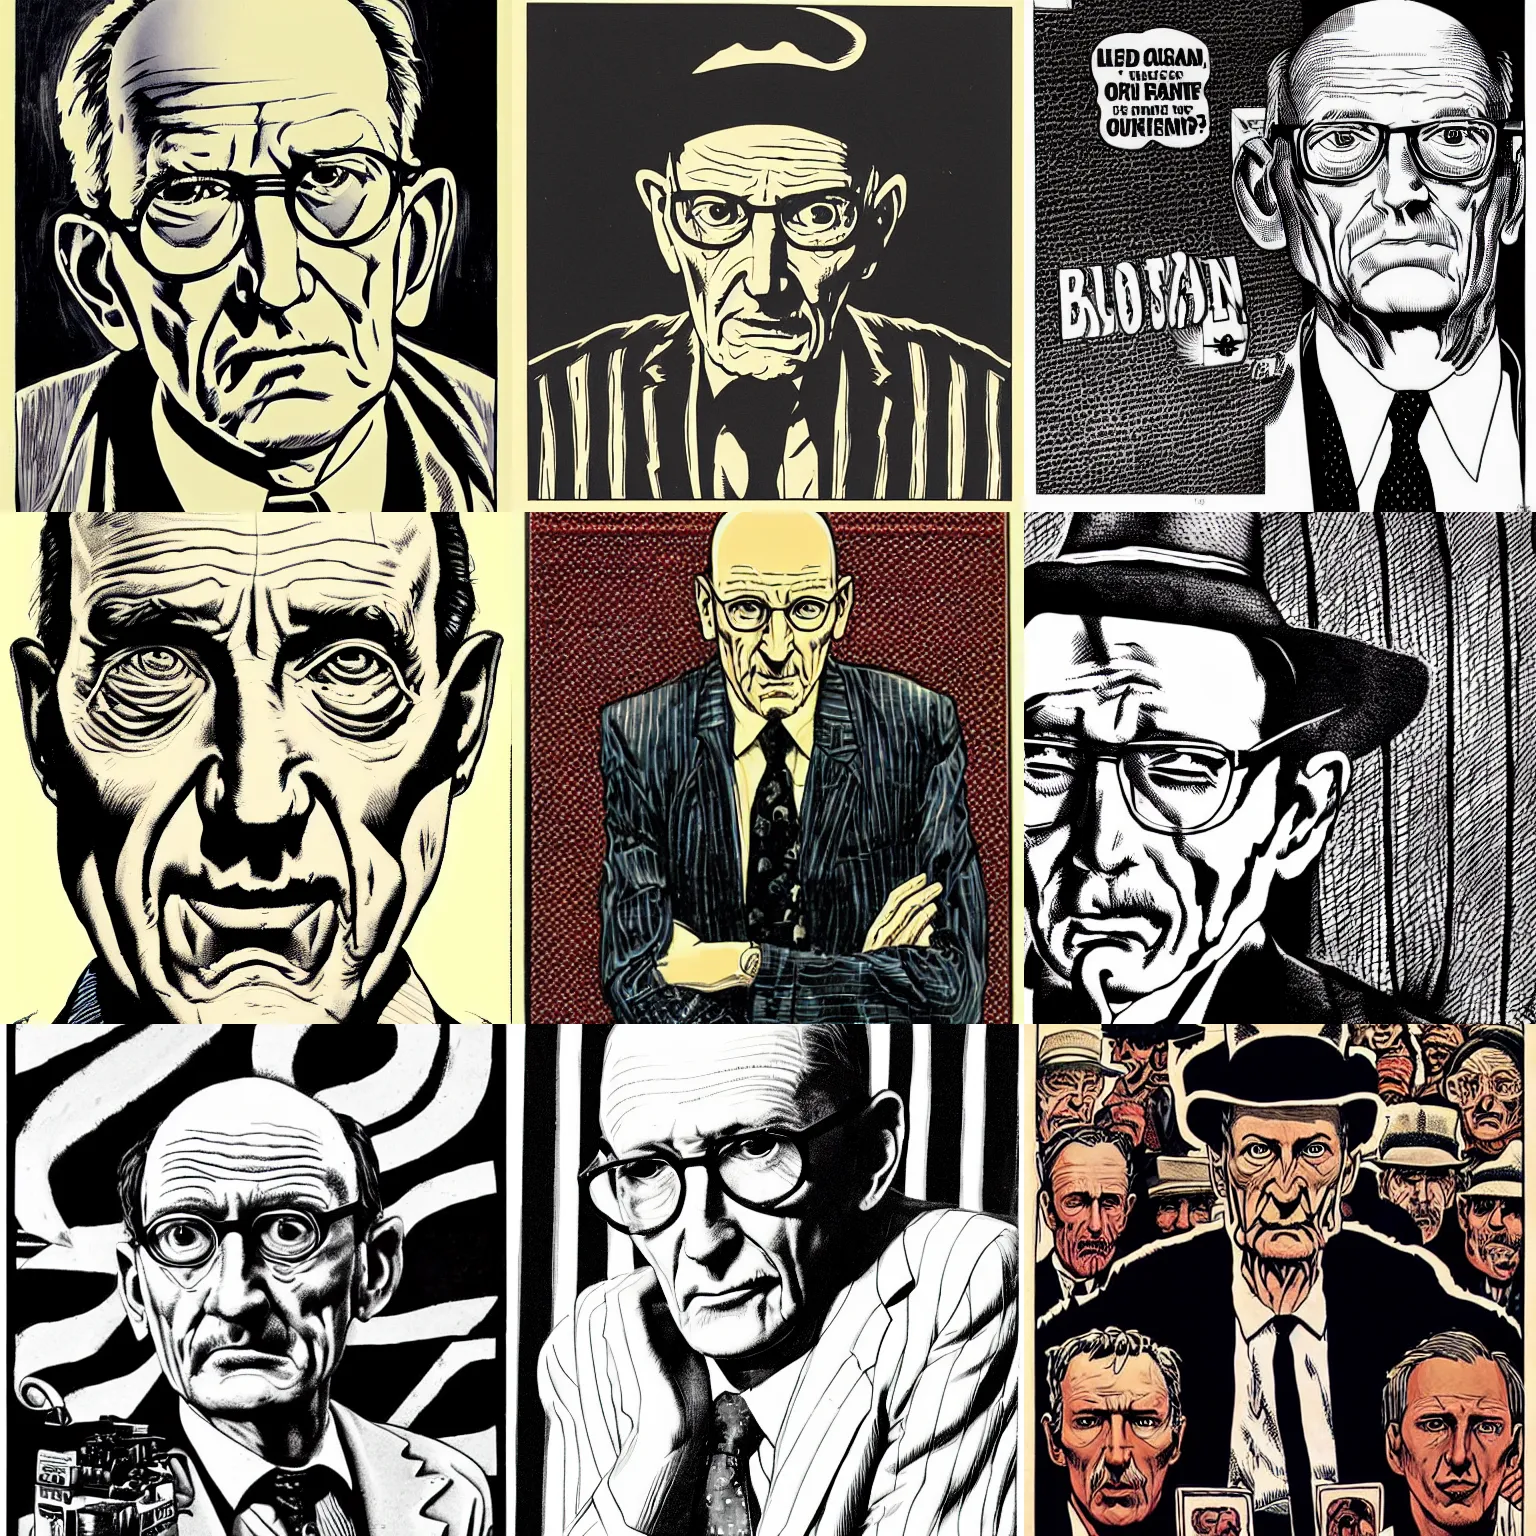 Prompt: William S Burroughs by Brian Bolland